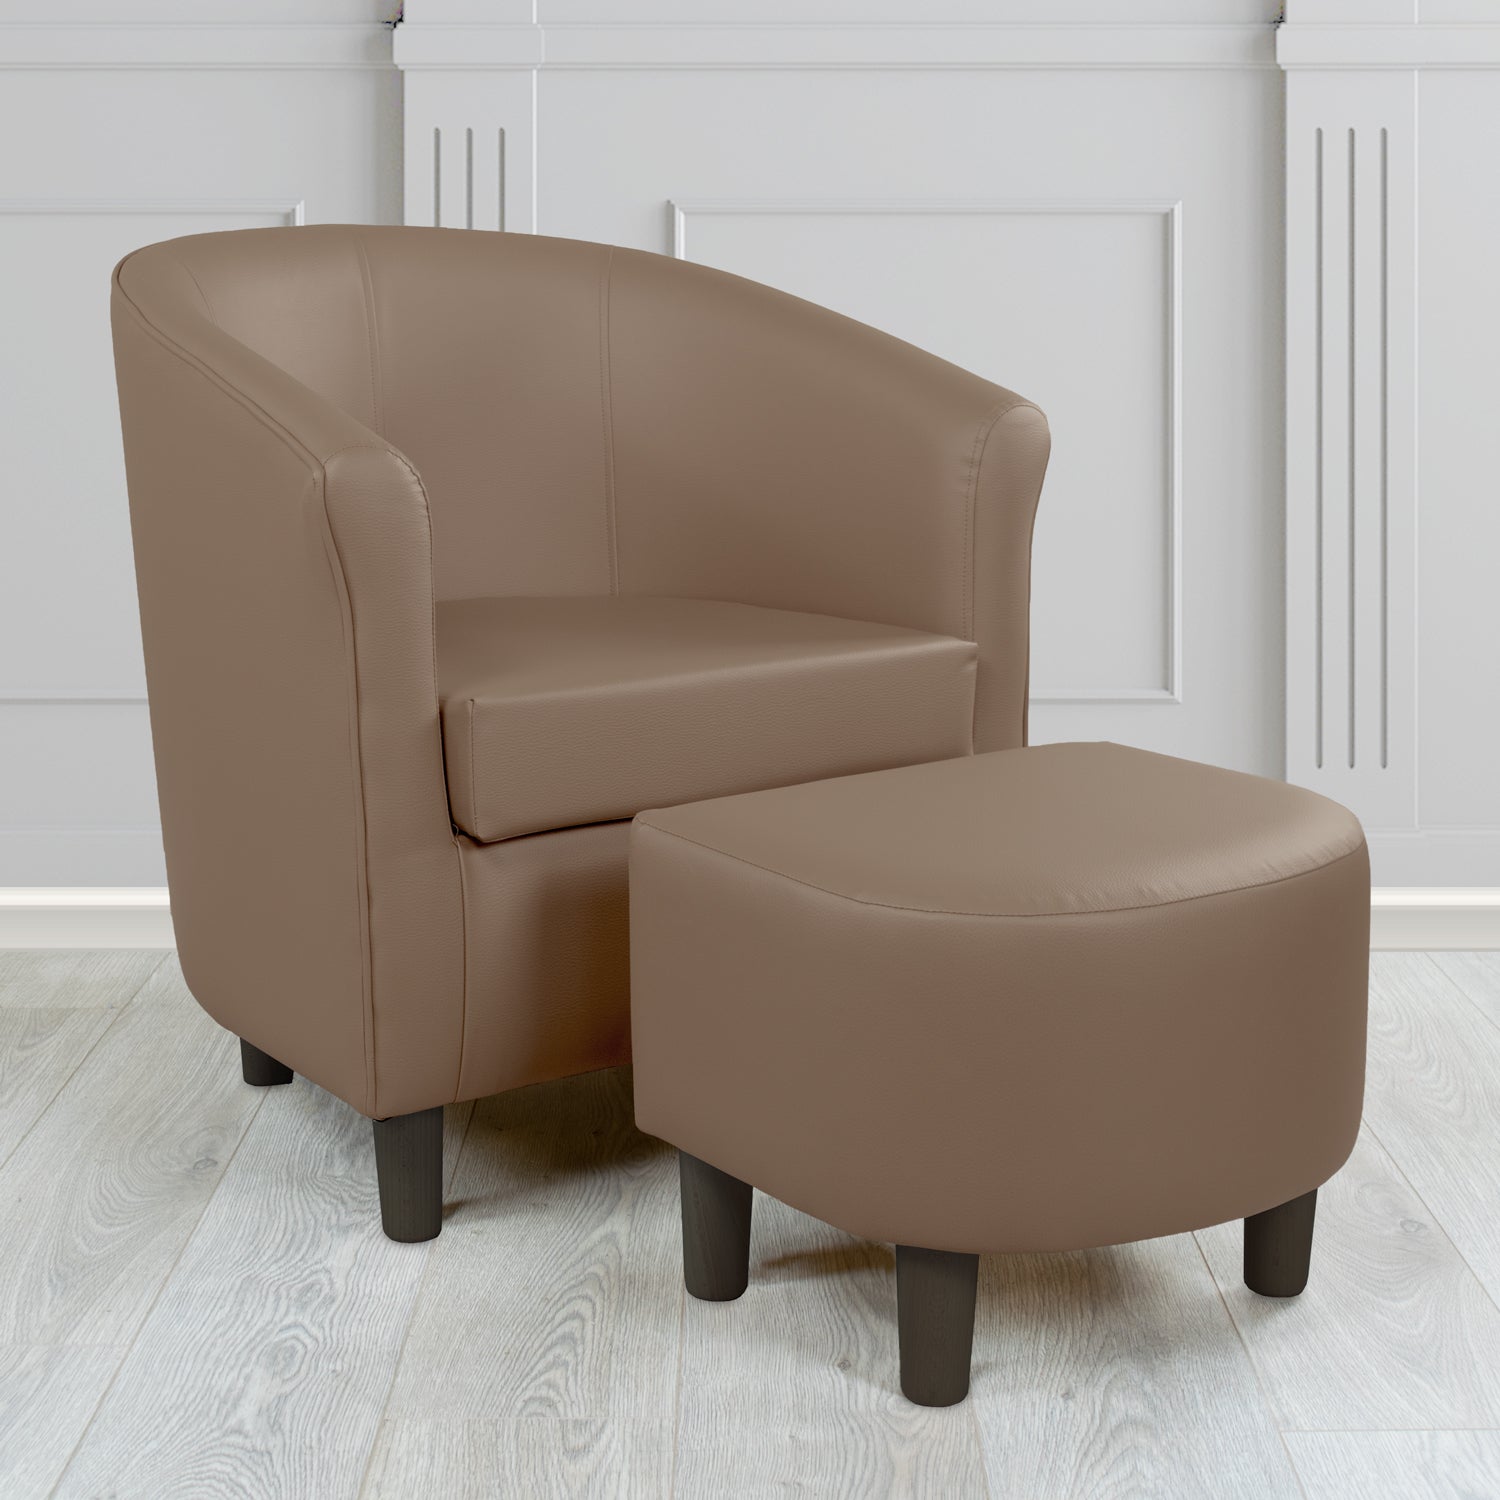 Tuscany Just Colour Pecan Faux Leather Tub Chair with Footstool Set - The Tub Chair Shop